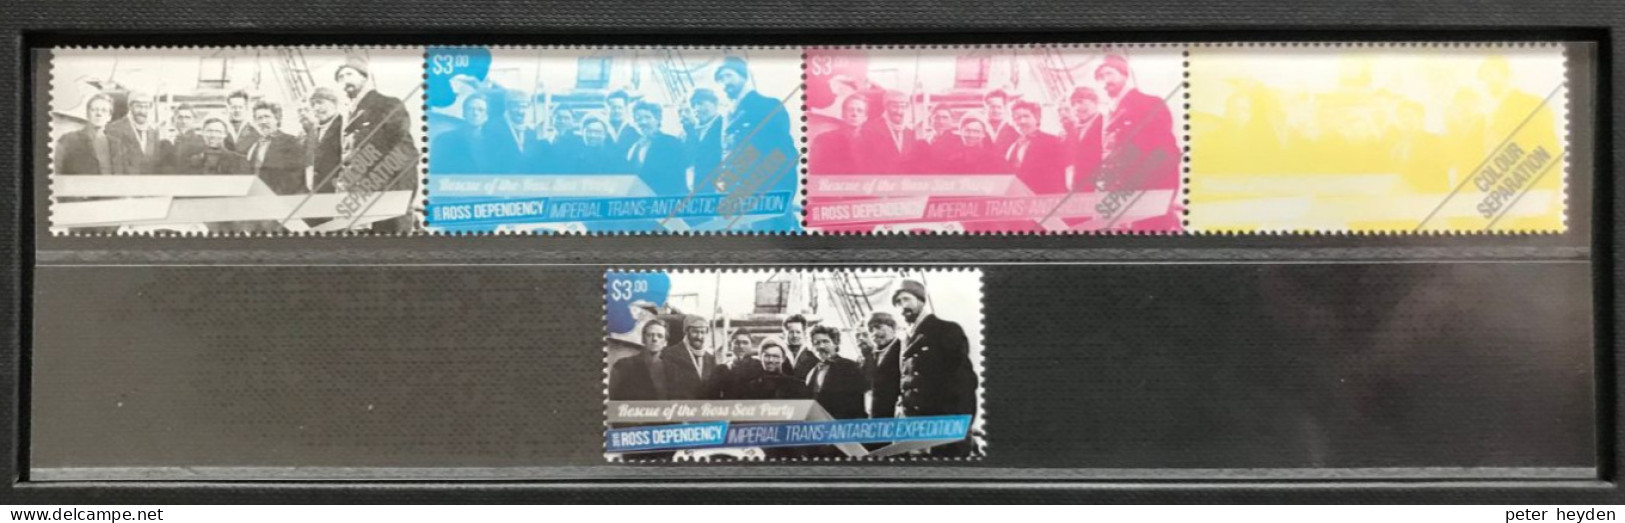 ROSS 2015 ~ DeLuxe Set With MNH ** Special Block, Se-tenant Block Of 6, Color Seperation Strip, FDC Etc. - Ongebruikt